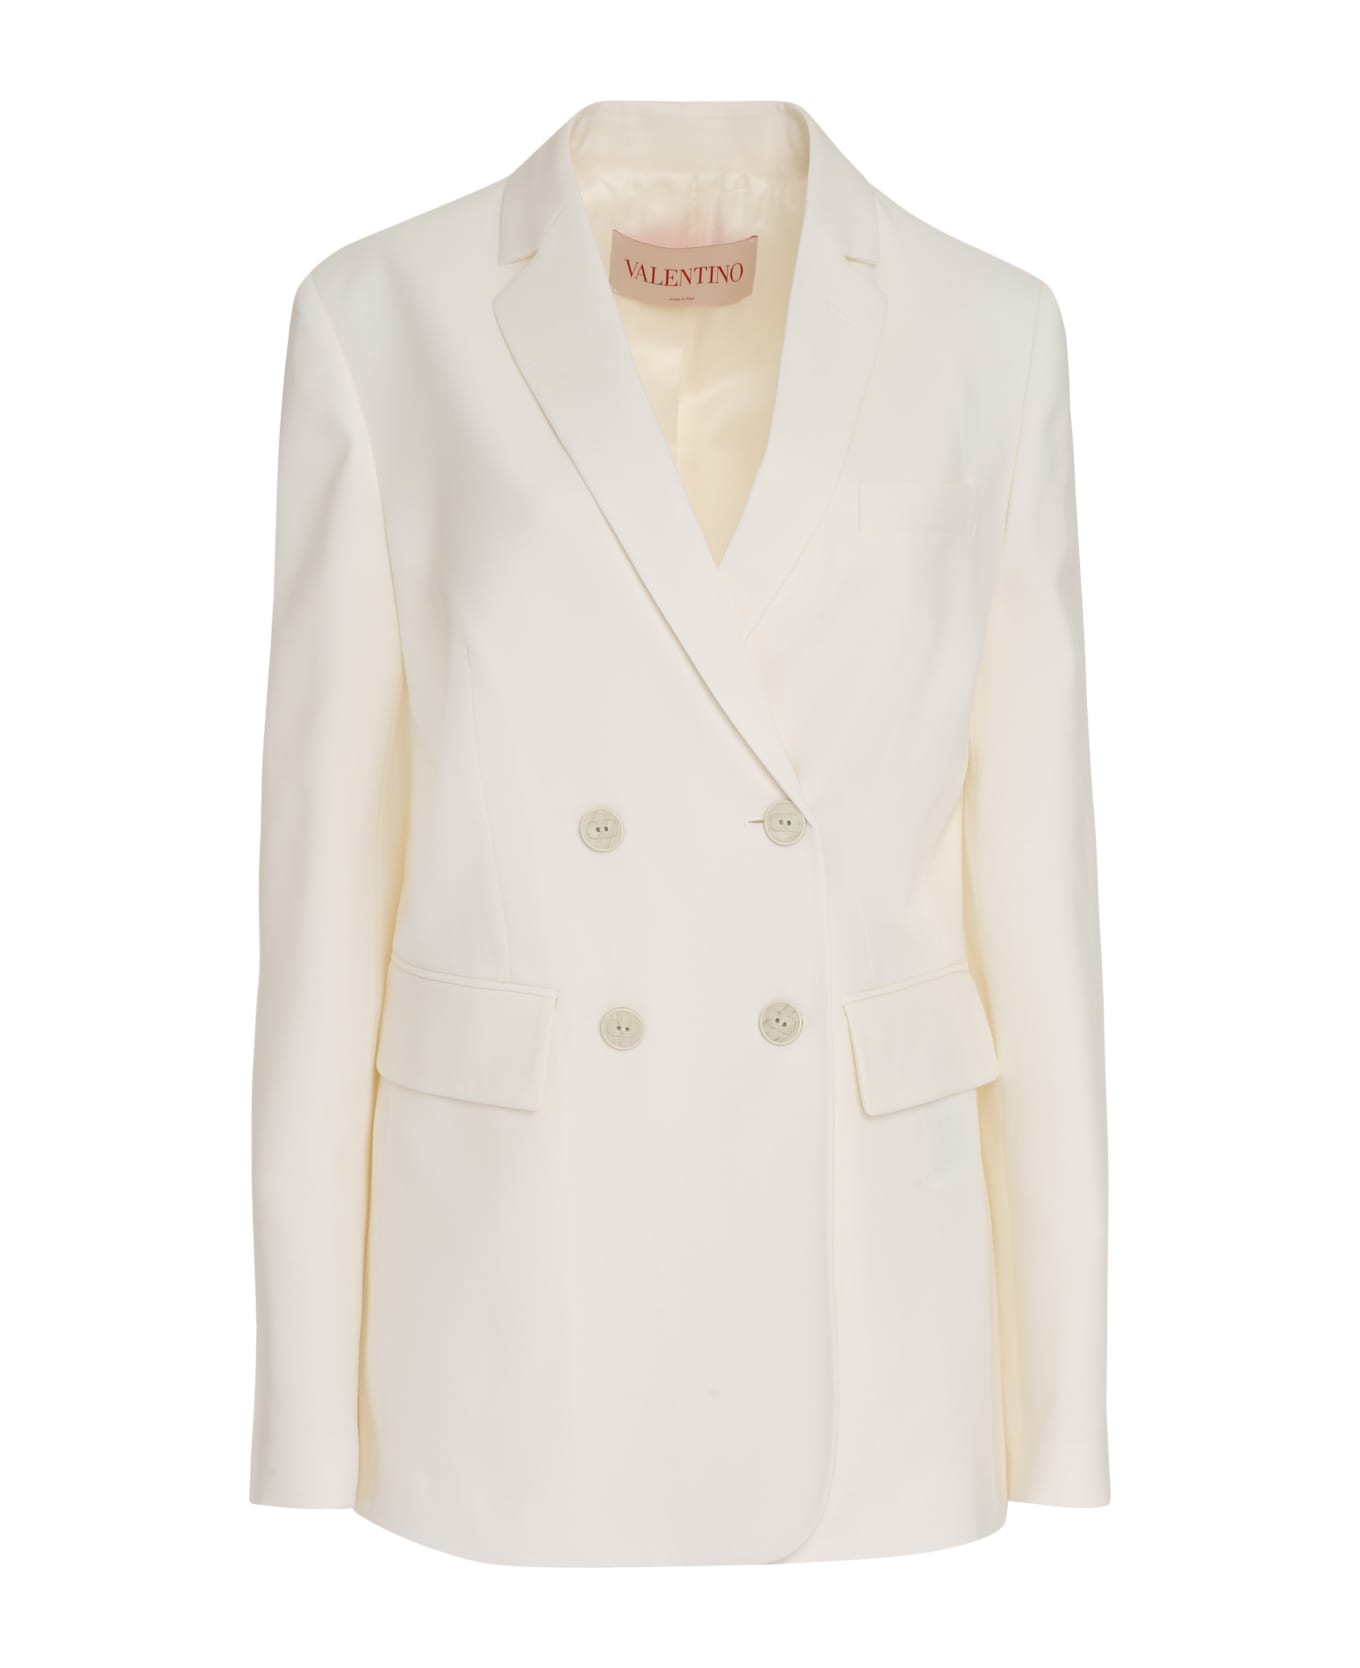 Valentino Double-breasted Wool Blazer - Ivory ブレザー